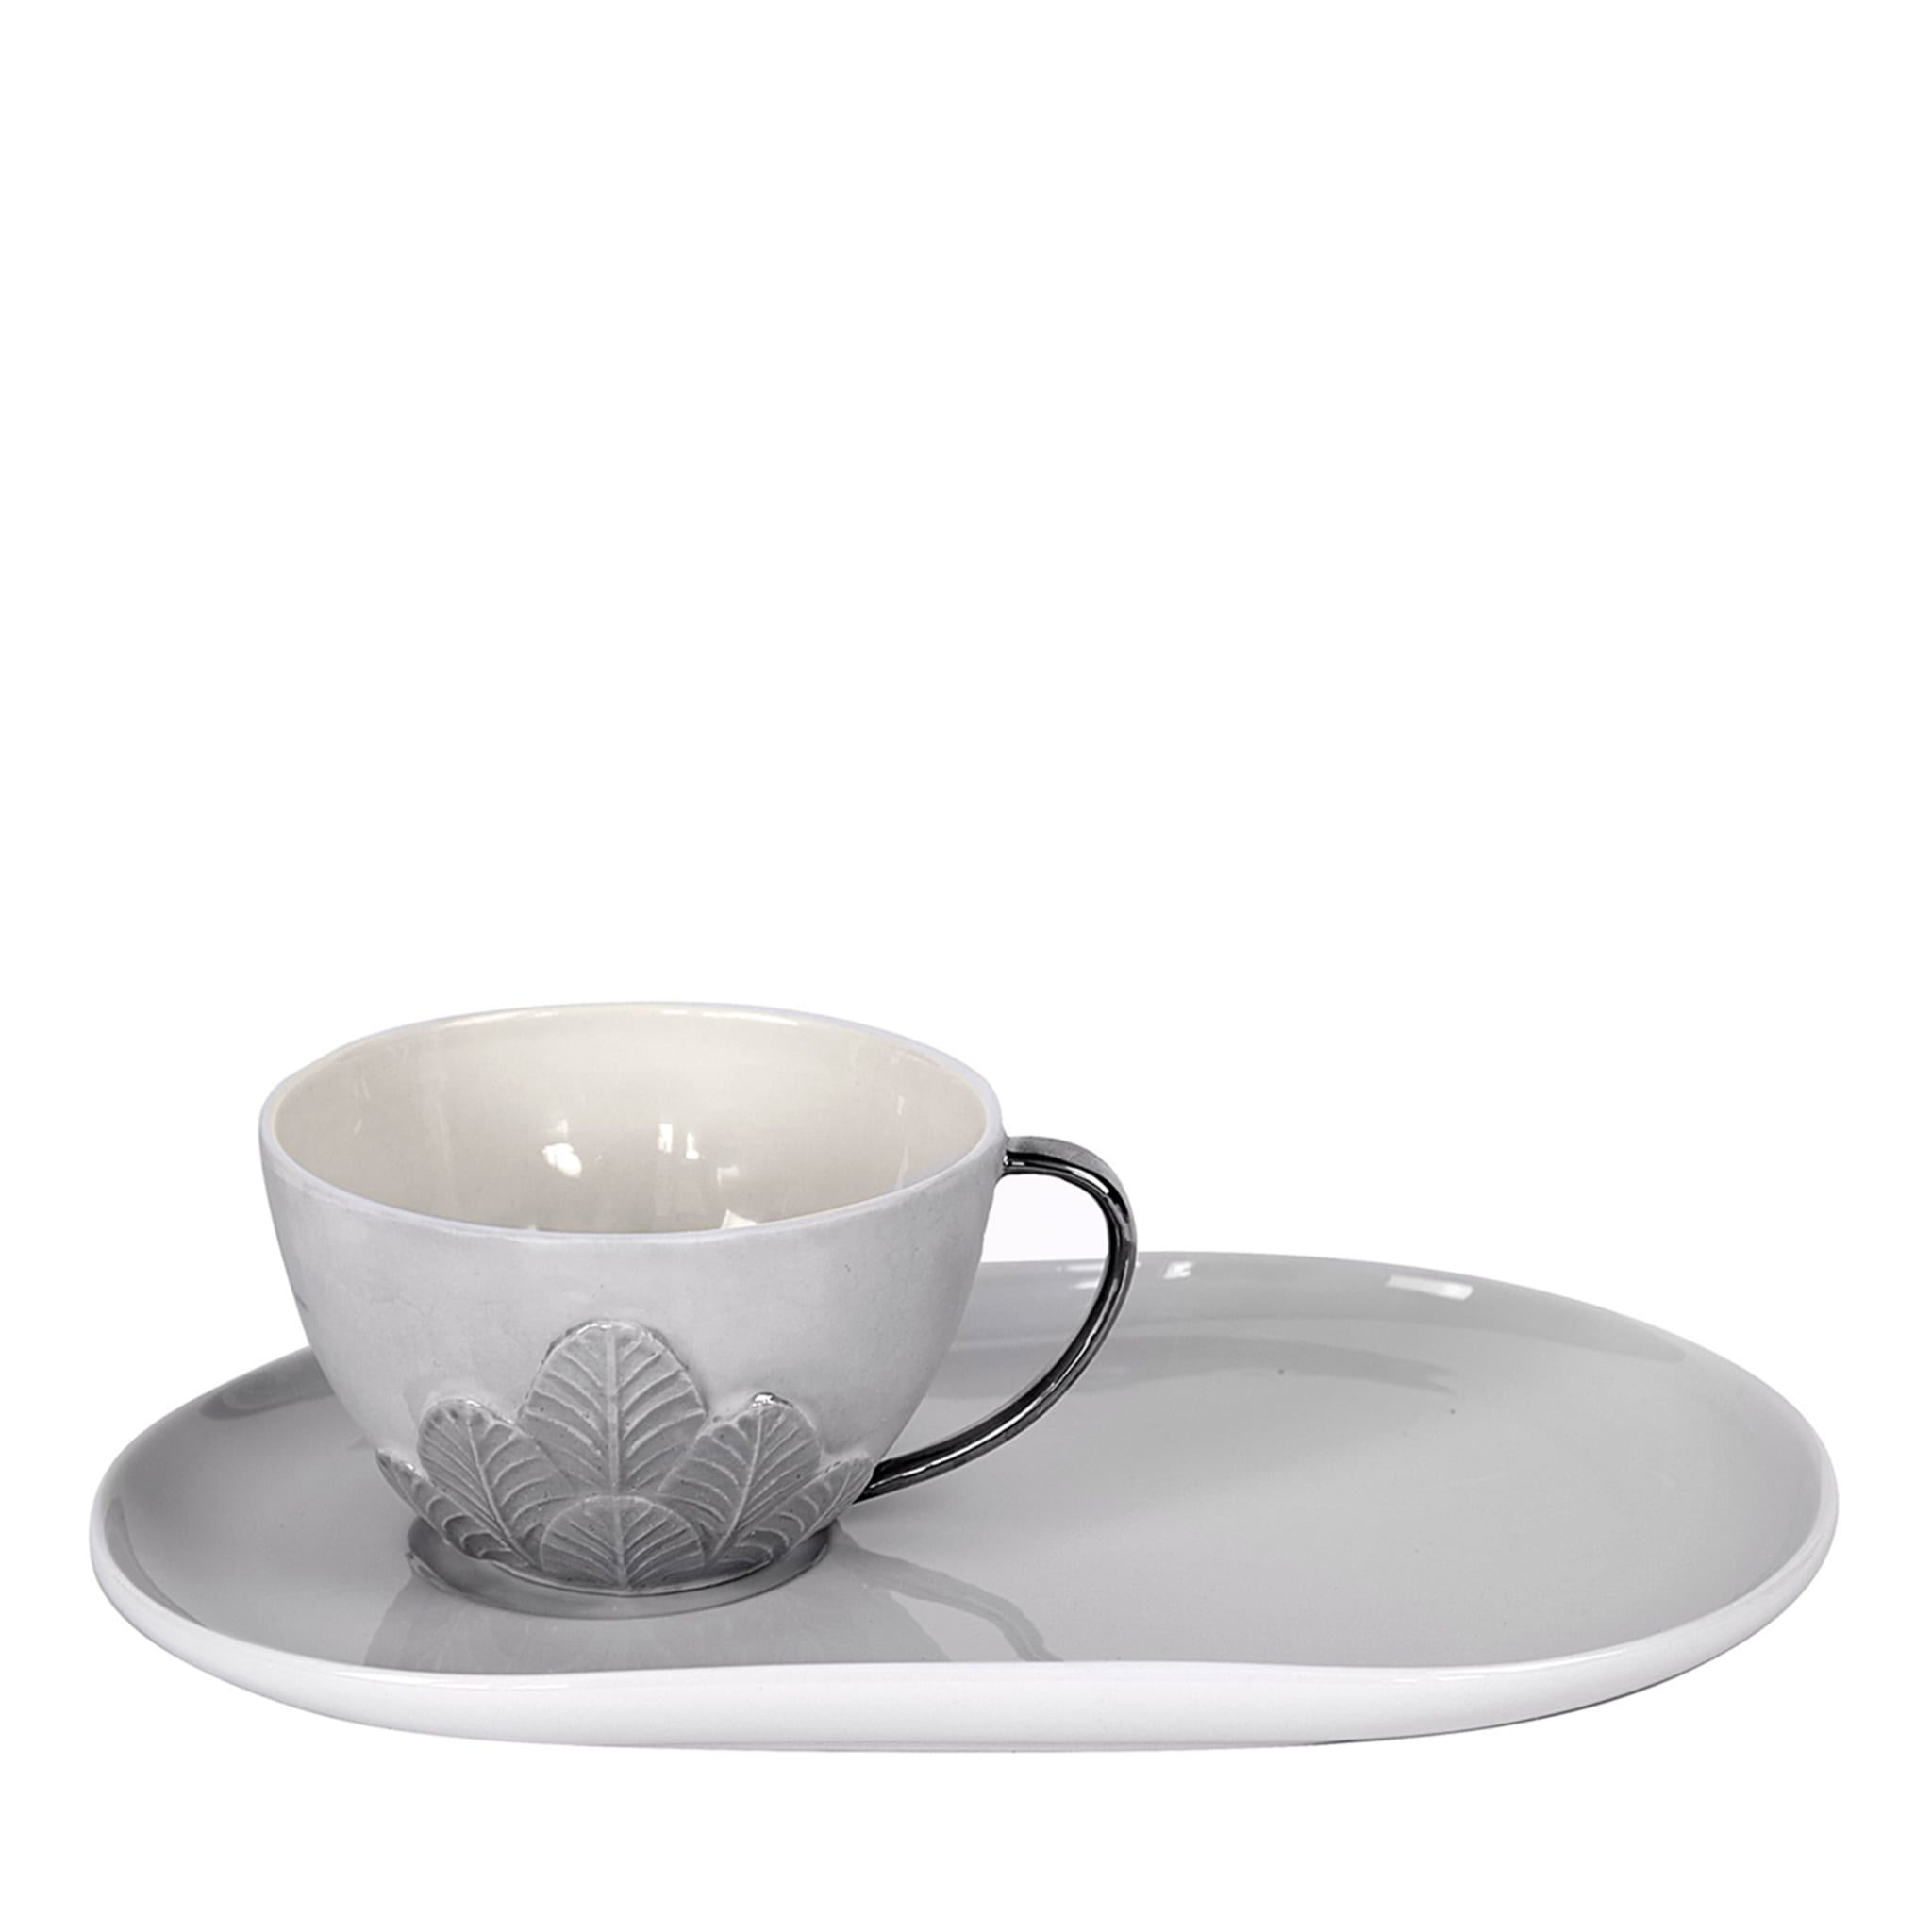 PEACOCK TEA CUP WITH DELIGHT DISH - GRAY - Main view